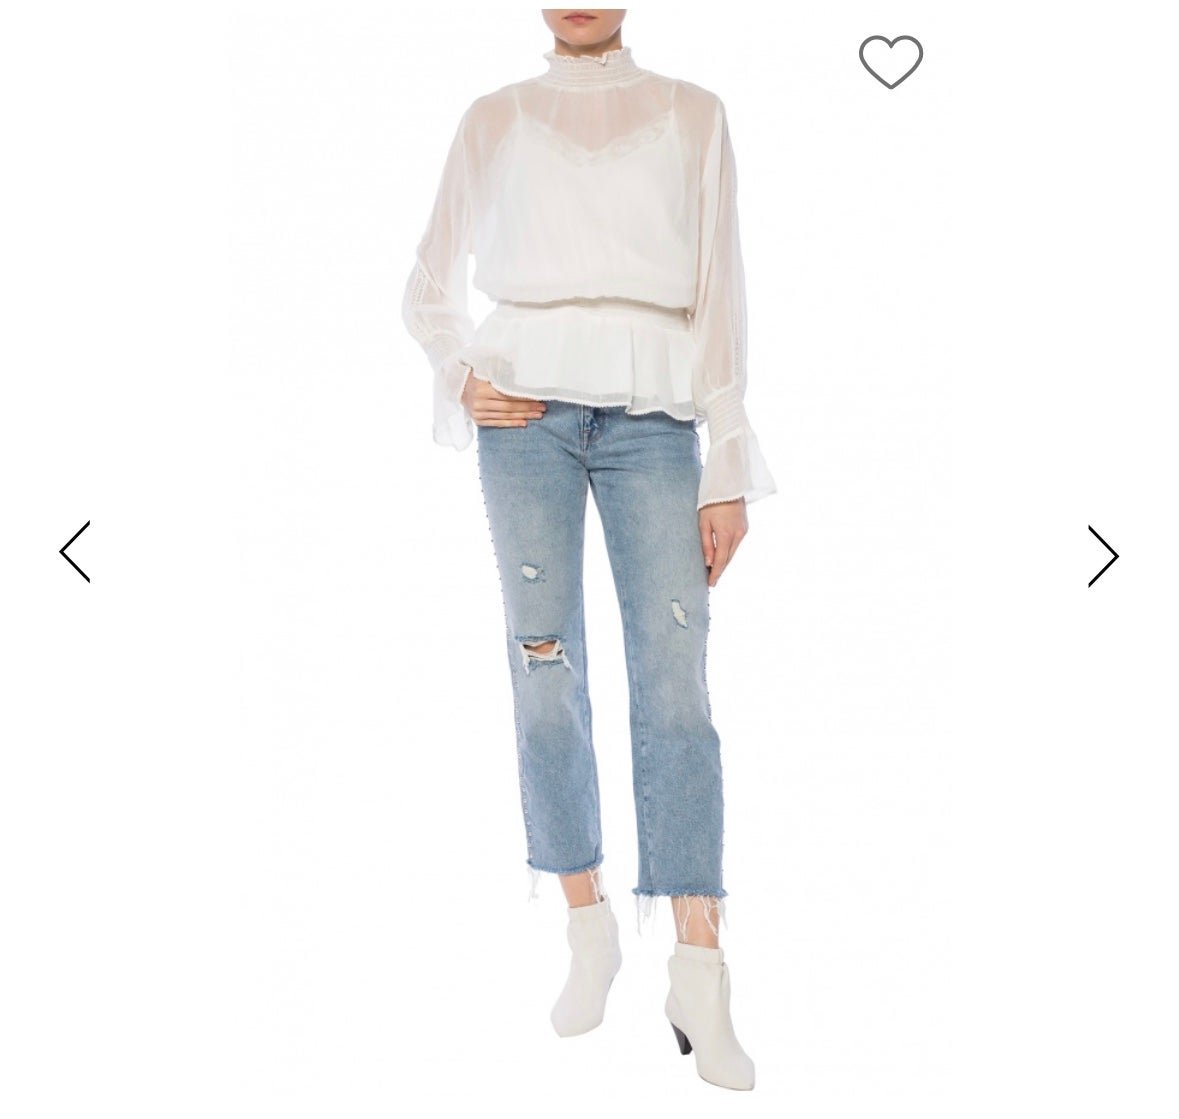 big discount NWT AllSaints Clarette Top in Oyster Size 